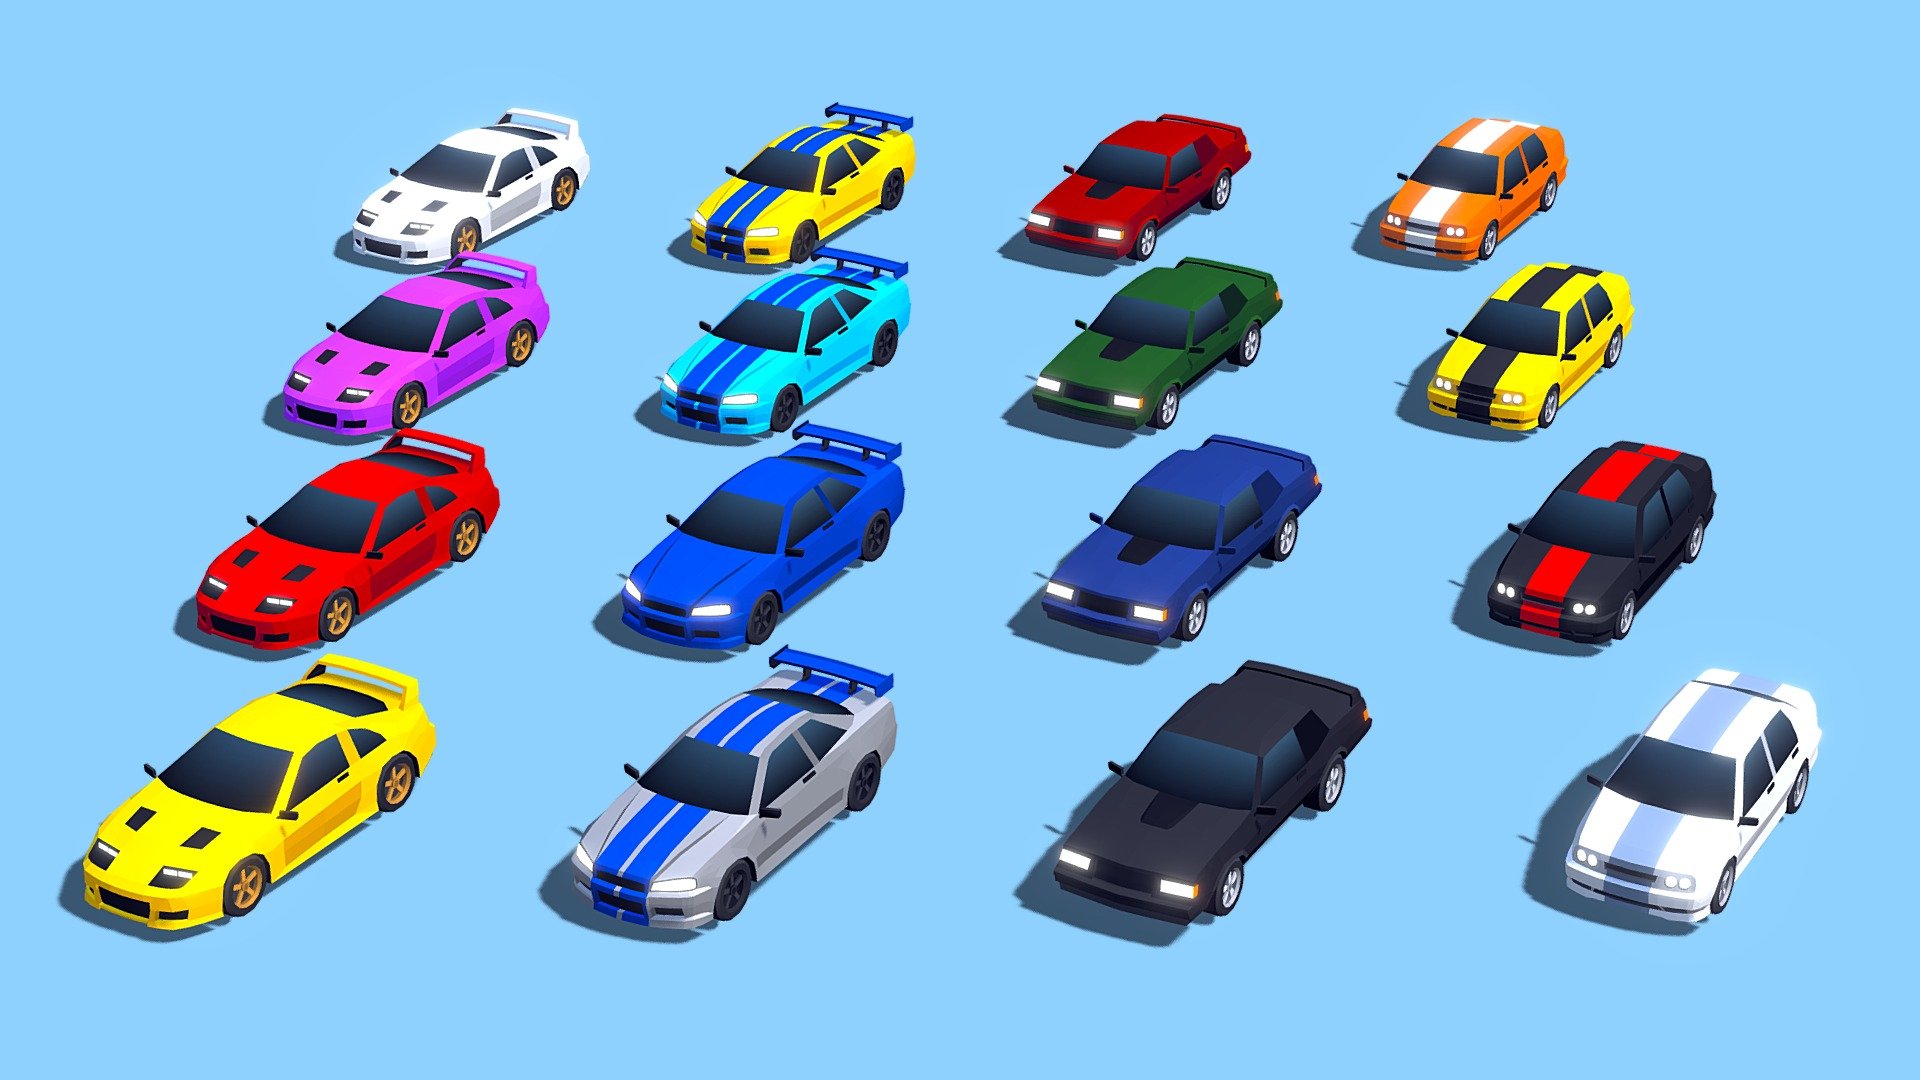 February update (2023.2) of the Low Poly Cars - Mega Pack asset, which is available in the Unity Asset Store and Sketchfab. This update will be launched on February 4th 3d model